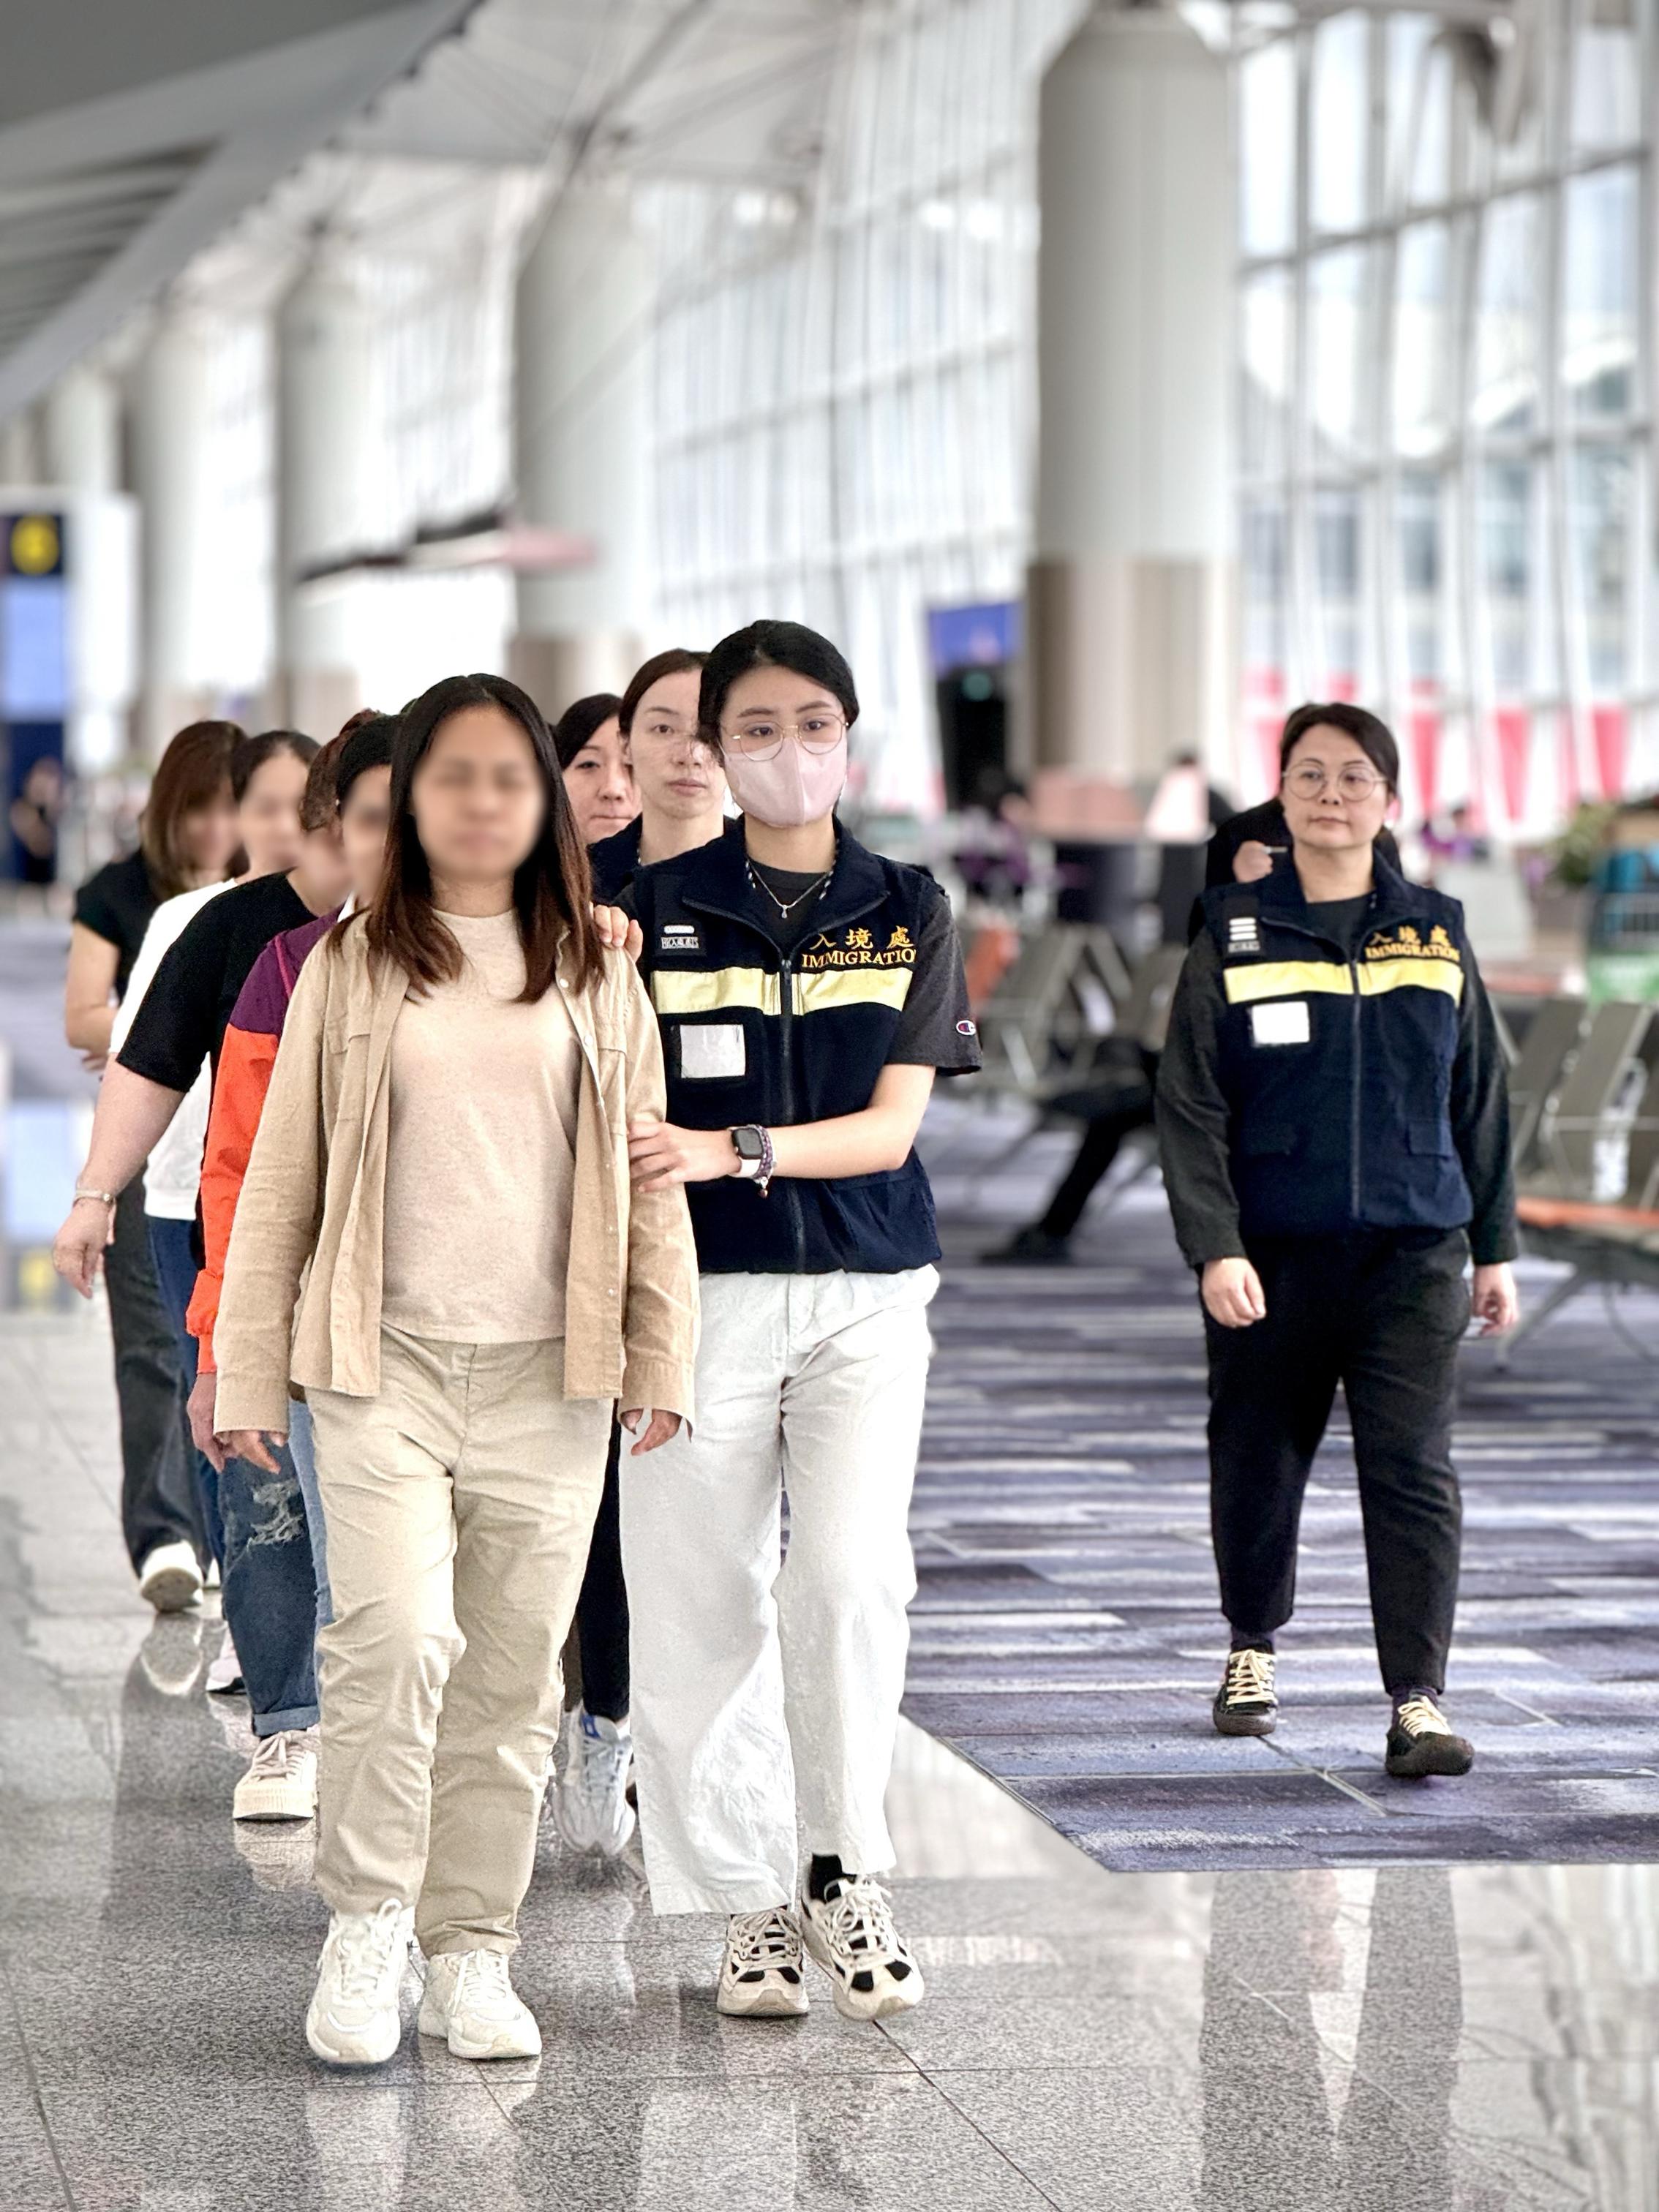 The Immigration Department (ImmD) carried out a repatriation operation today (April 30). A total of 26 Vietnamese illegal immigrants were repatriated to Vietnam. Photo shows removees being escorted by ImmD officers to depart from Hong Kong.